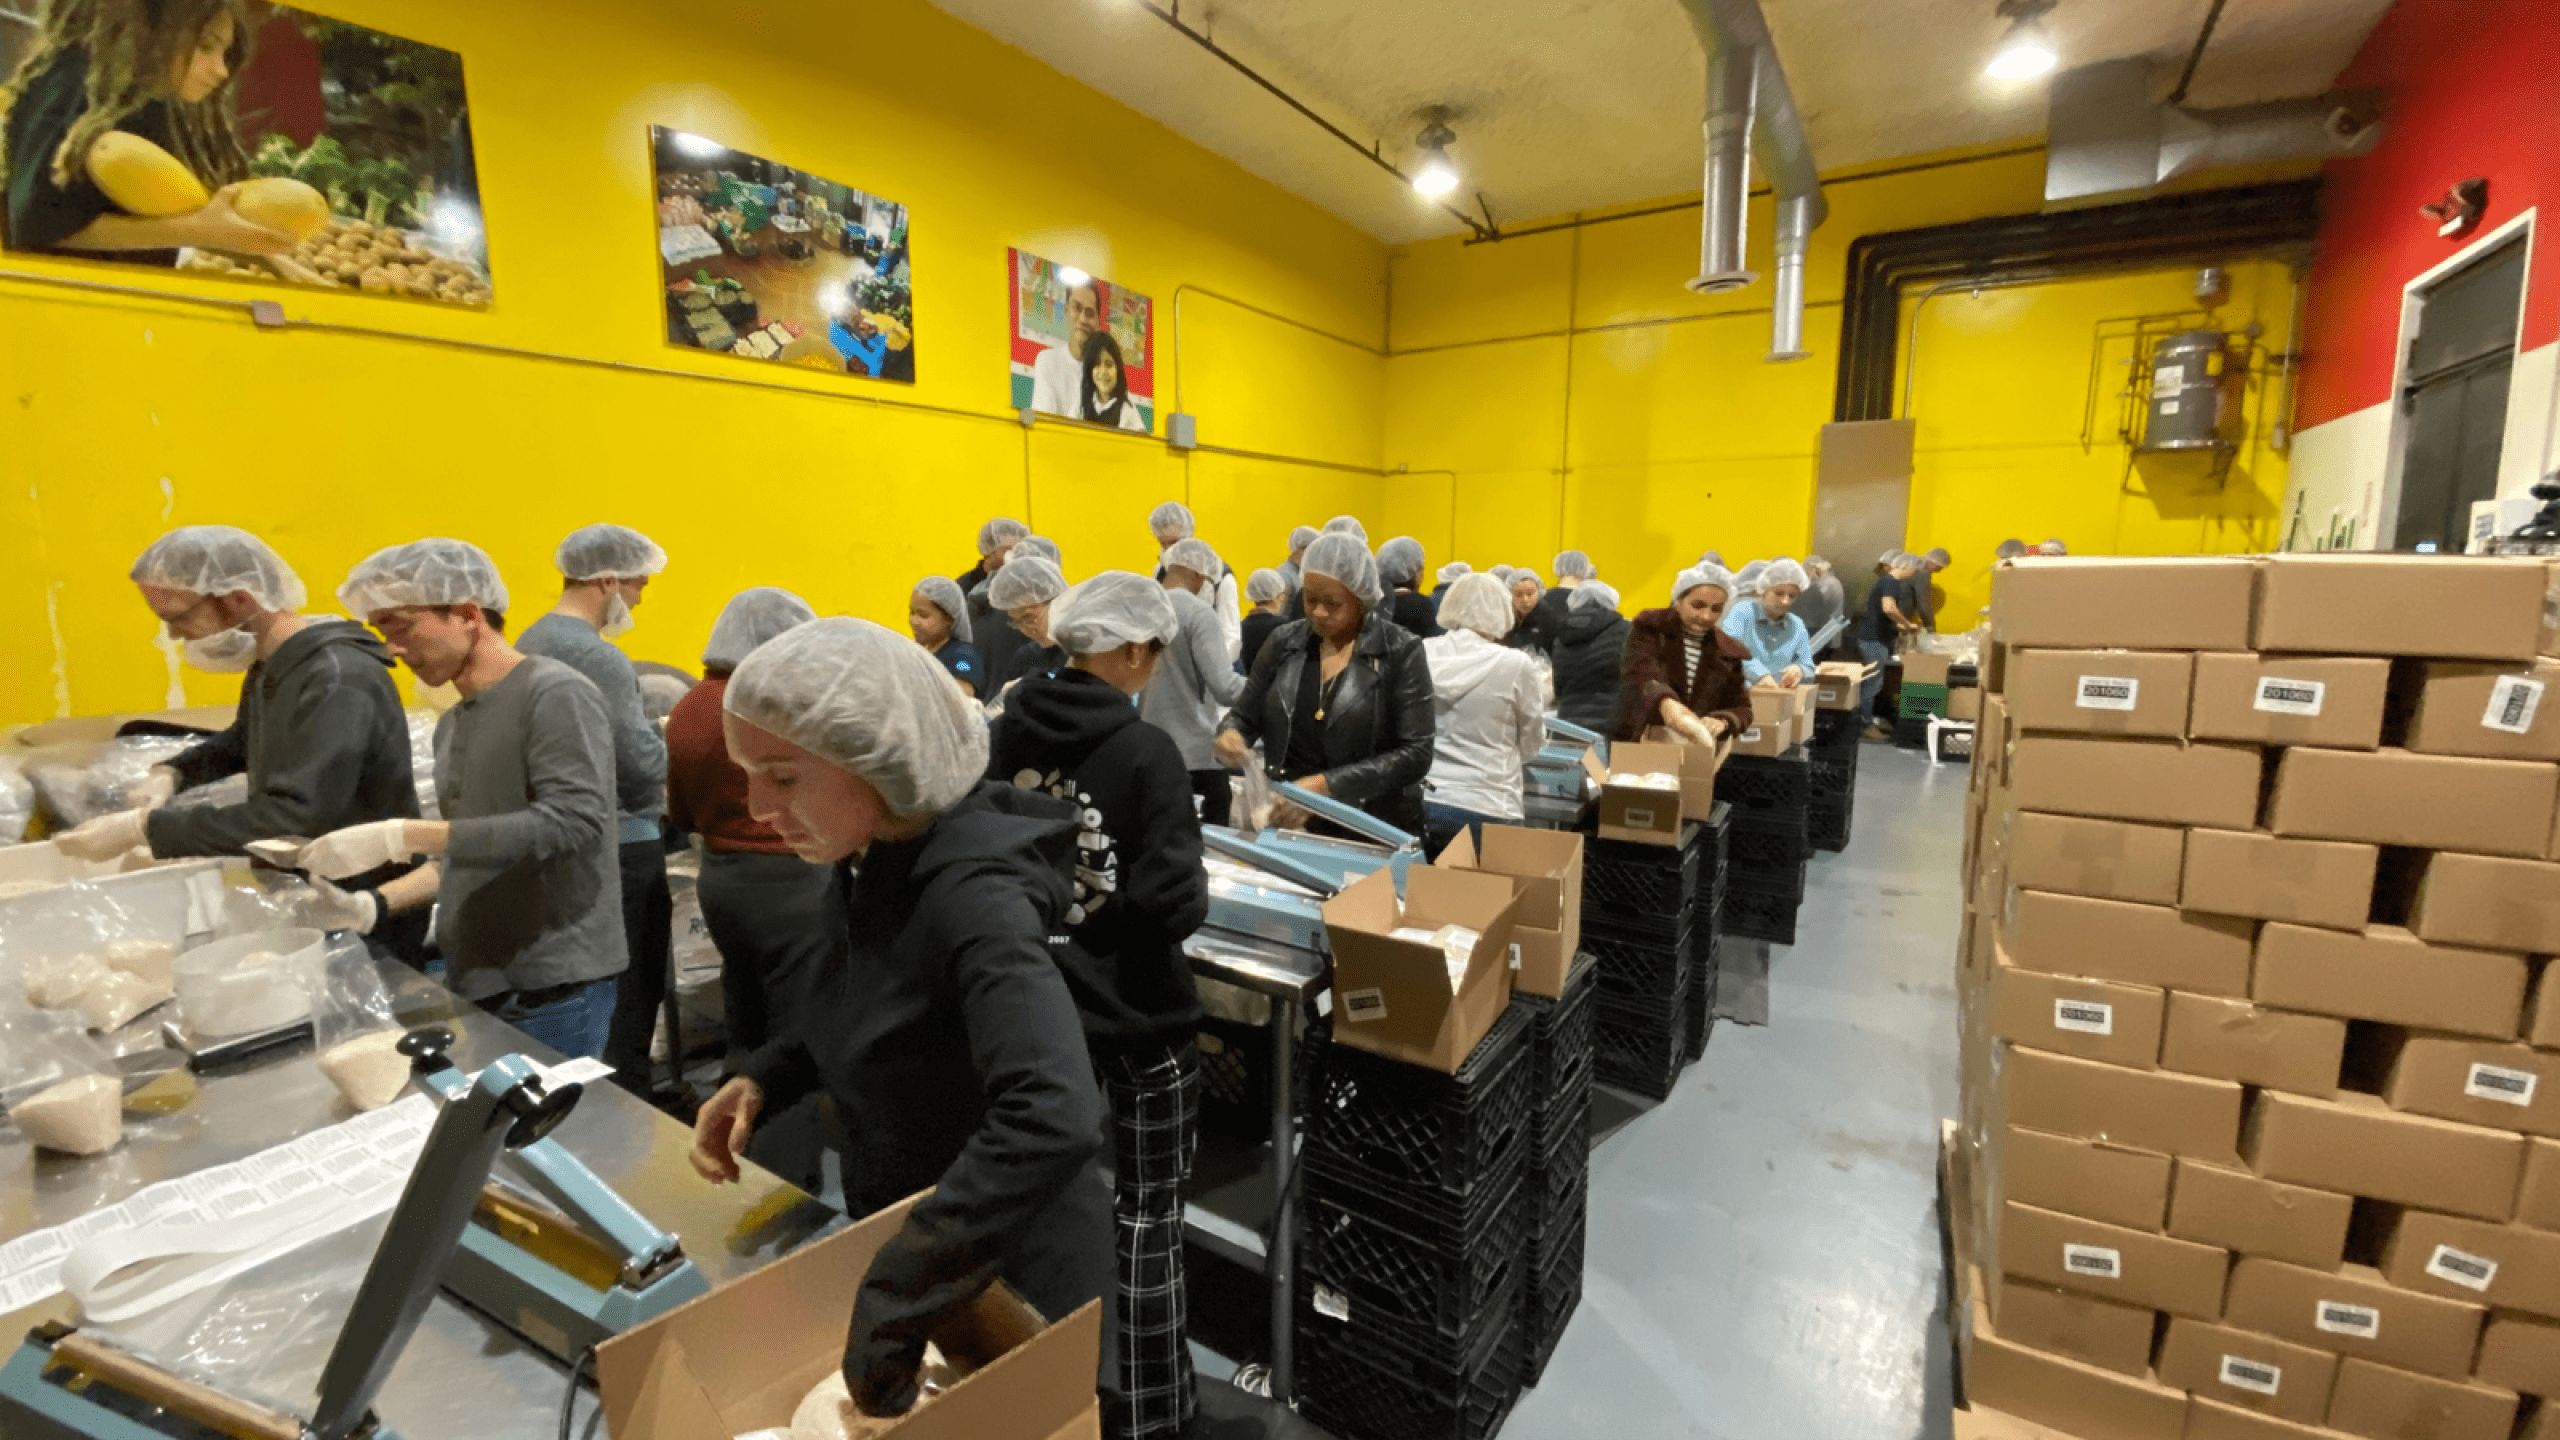 A group of people volunteer at a food bank.